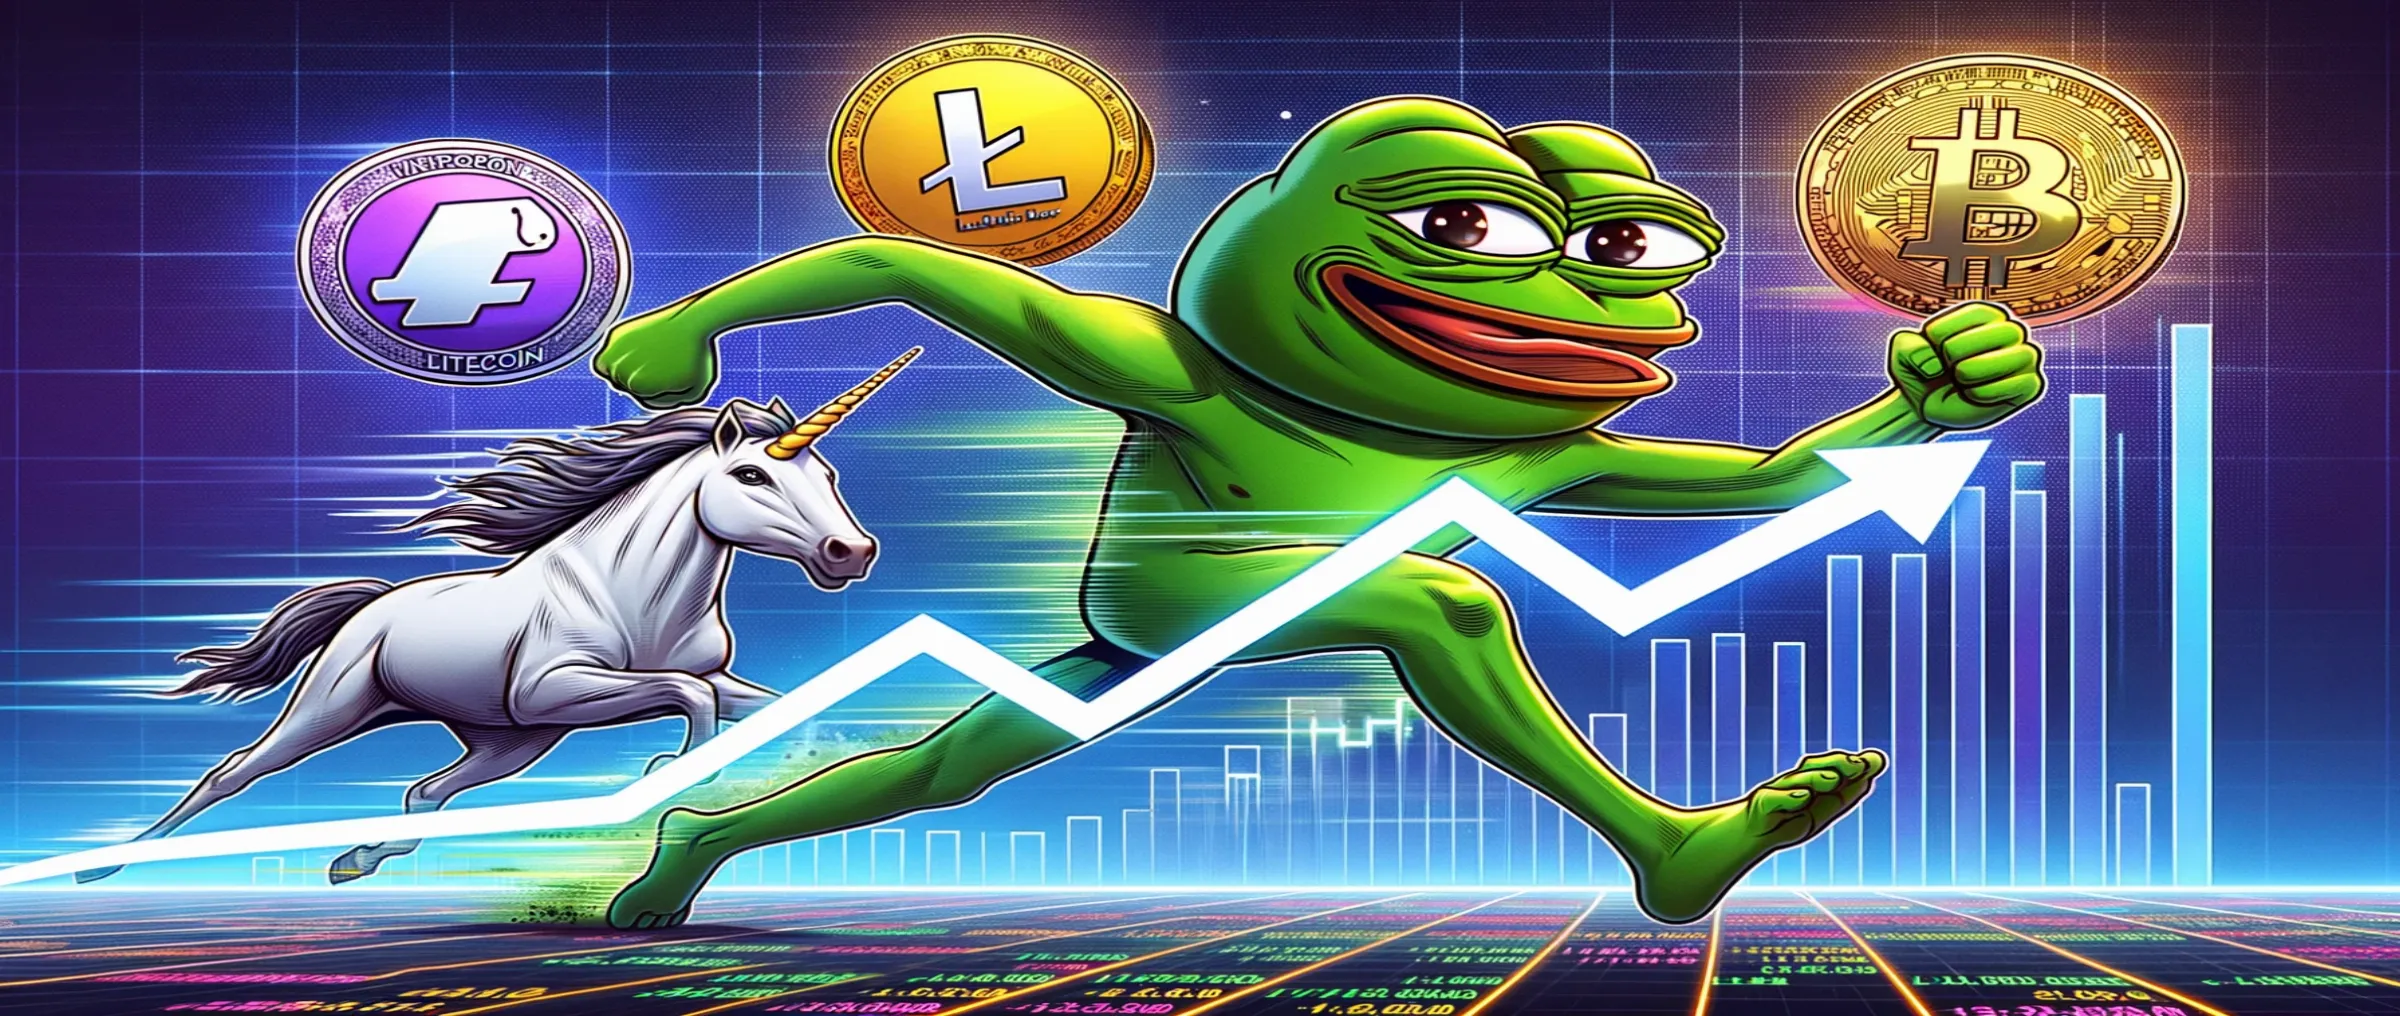 PEPE Reaches New High, Surpassing Uniswap and Litecoin in Market Capitalization